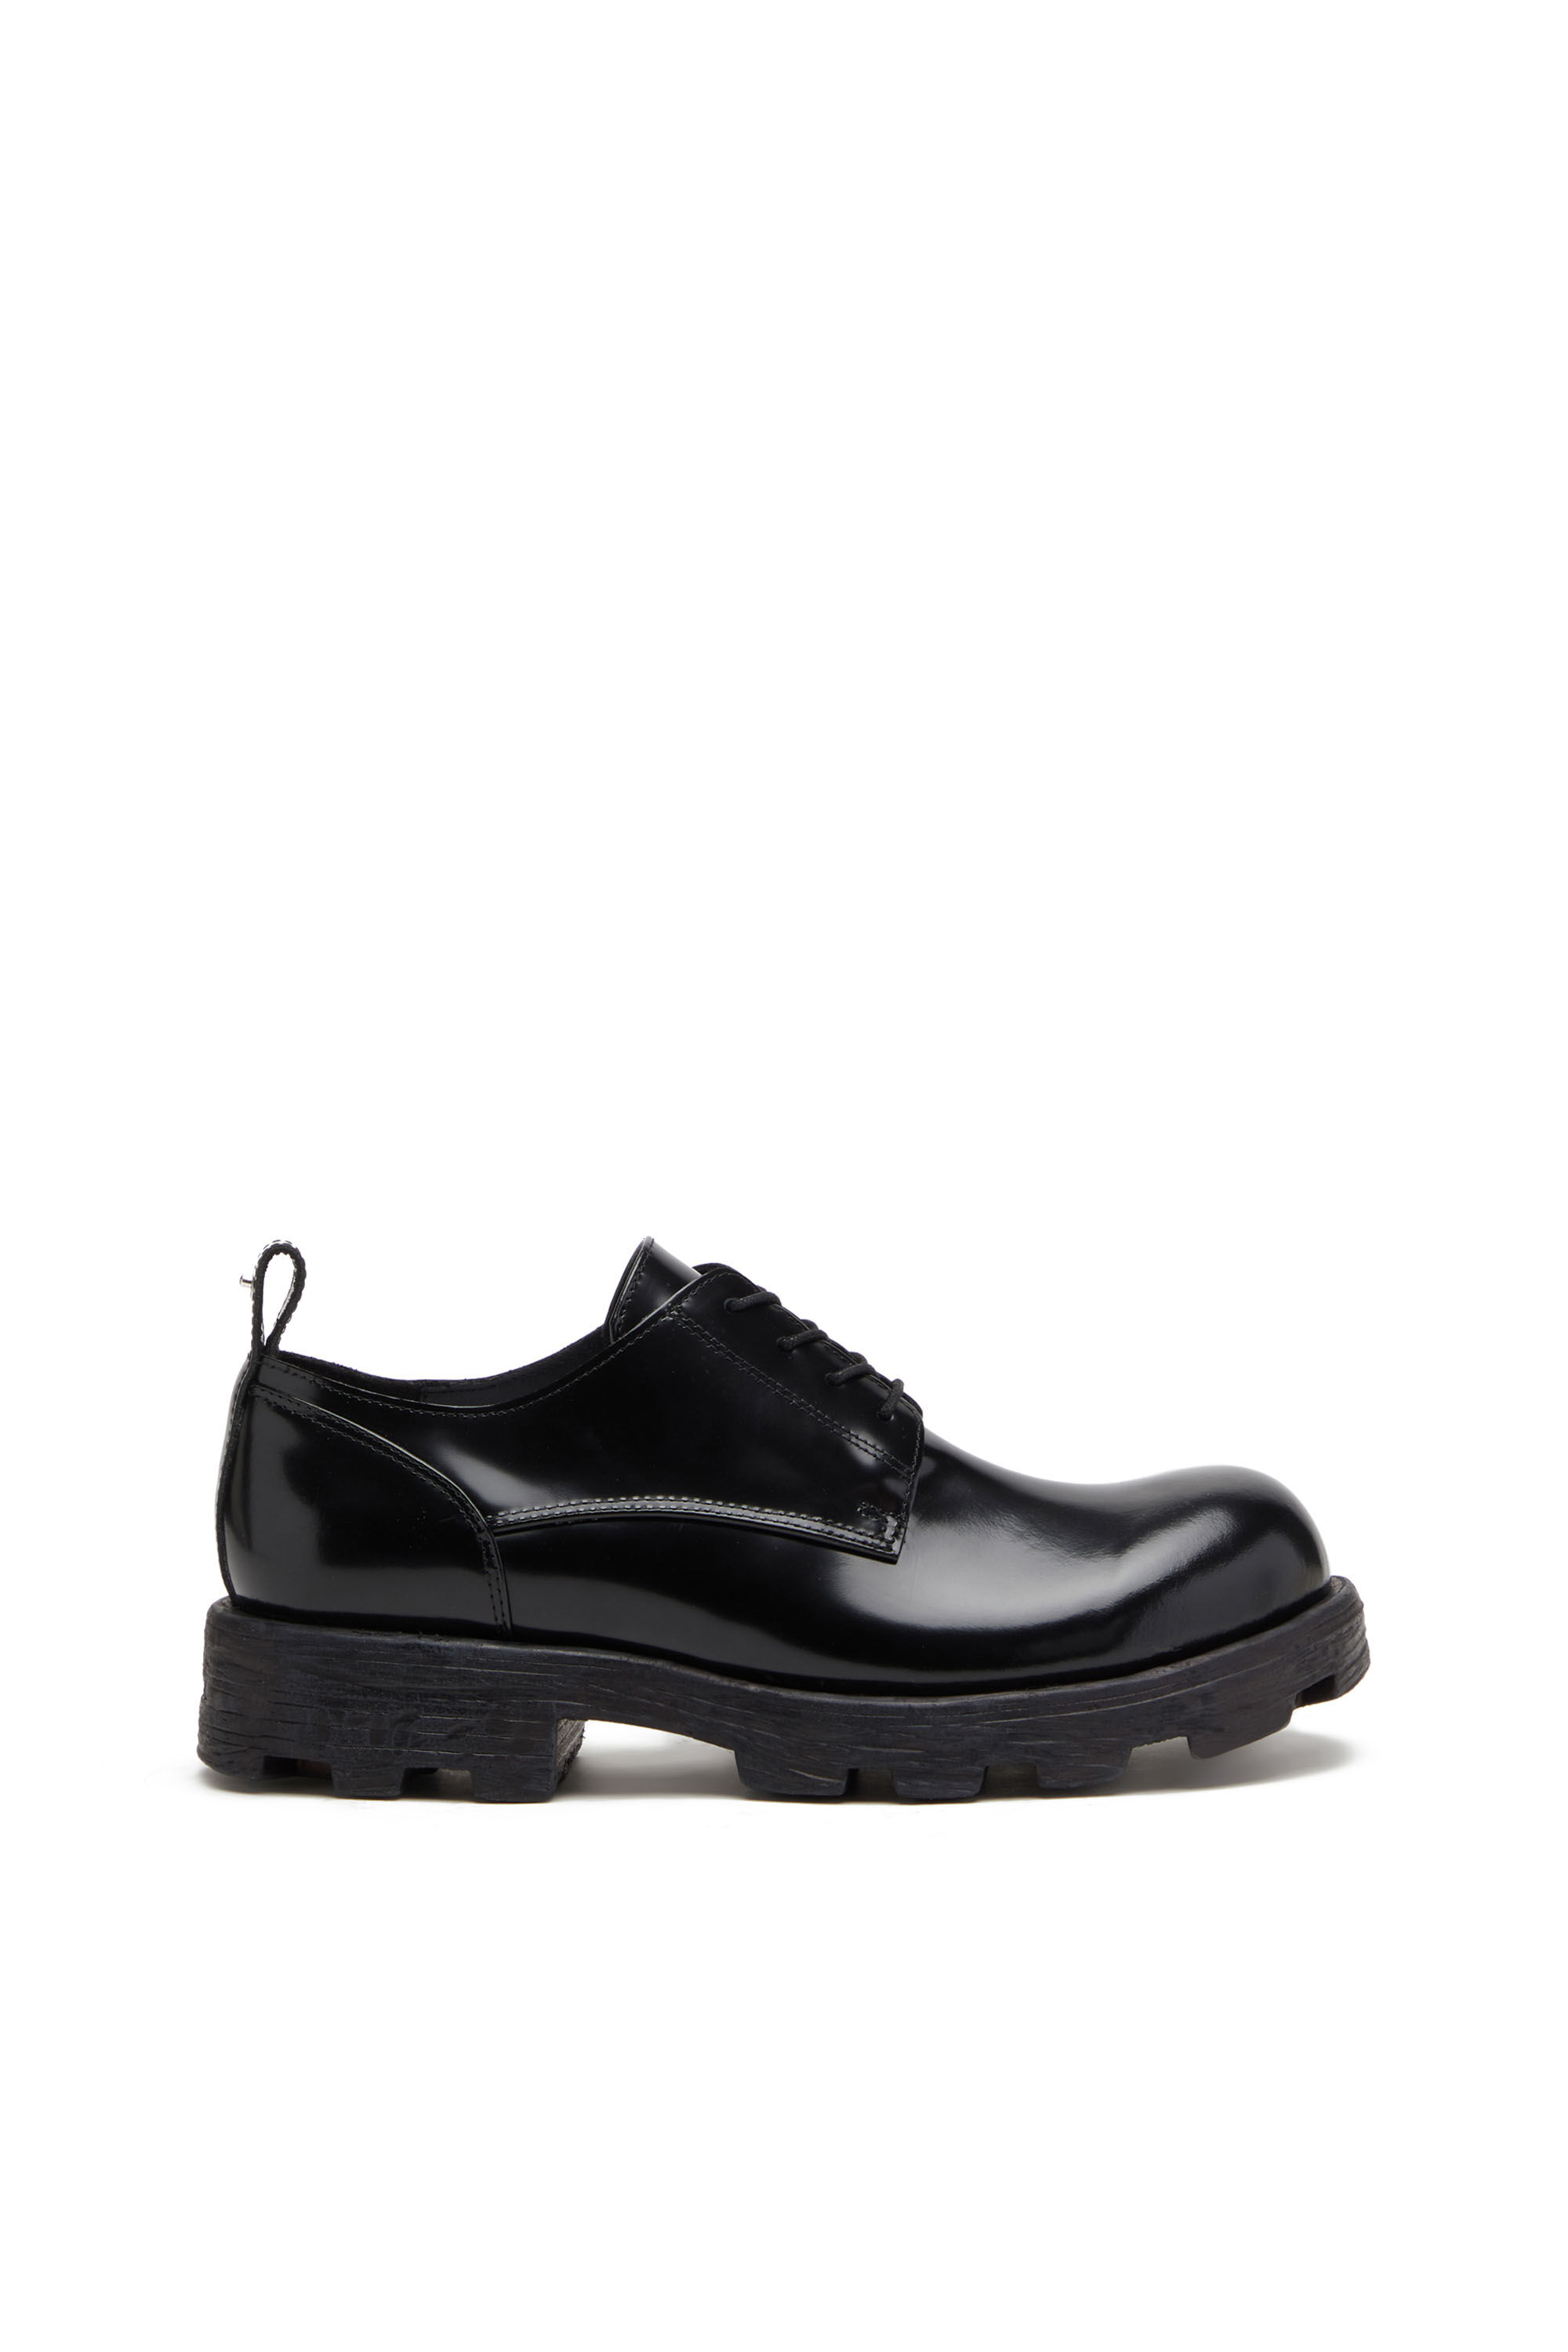 Diesel - D-HAMMER SH, Man D-Hammer SH - Lace-up shoes in shiny leather in Black - Image 1